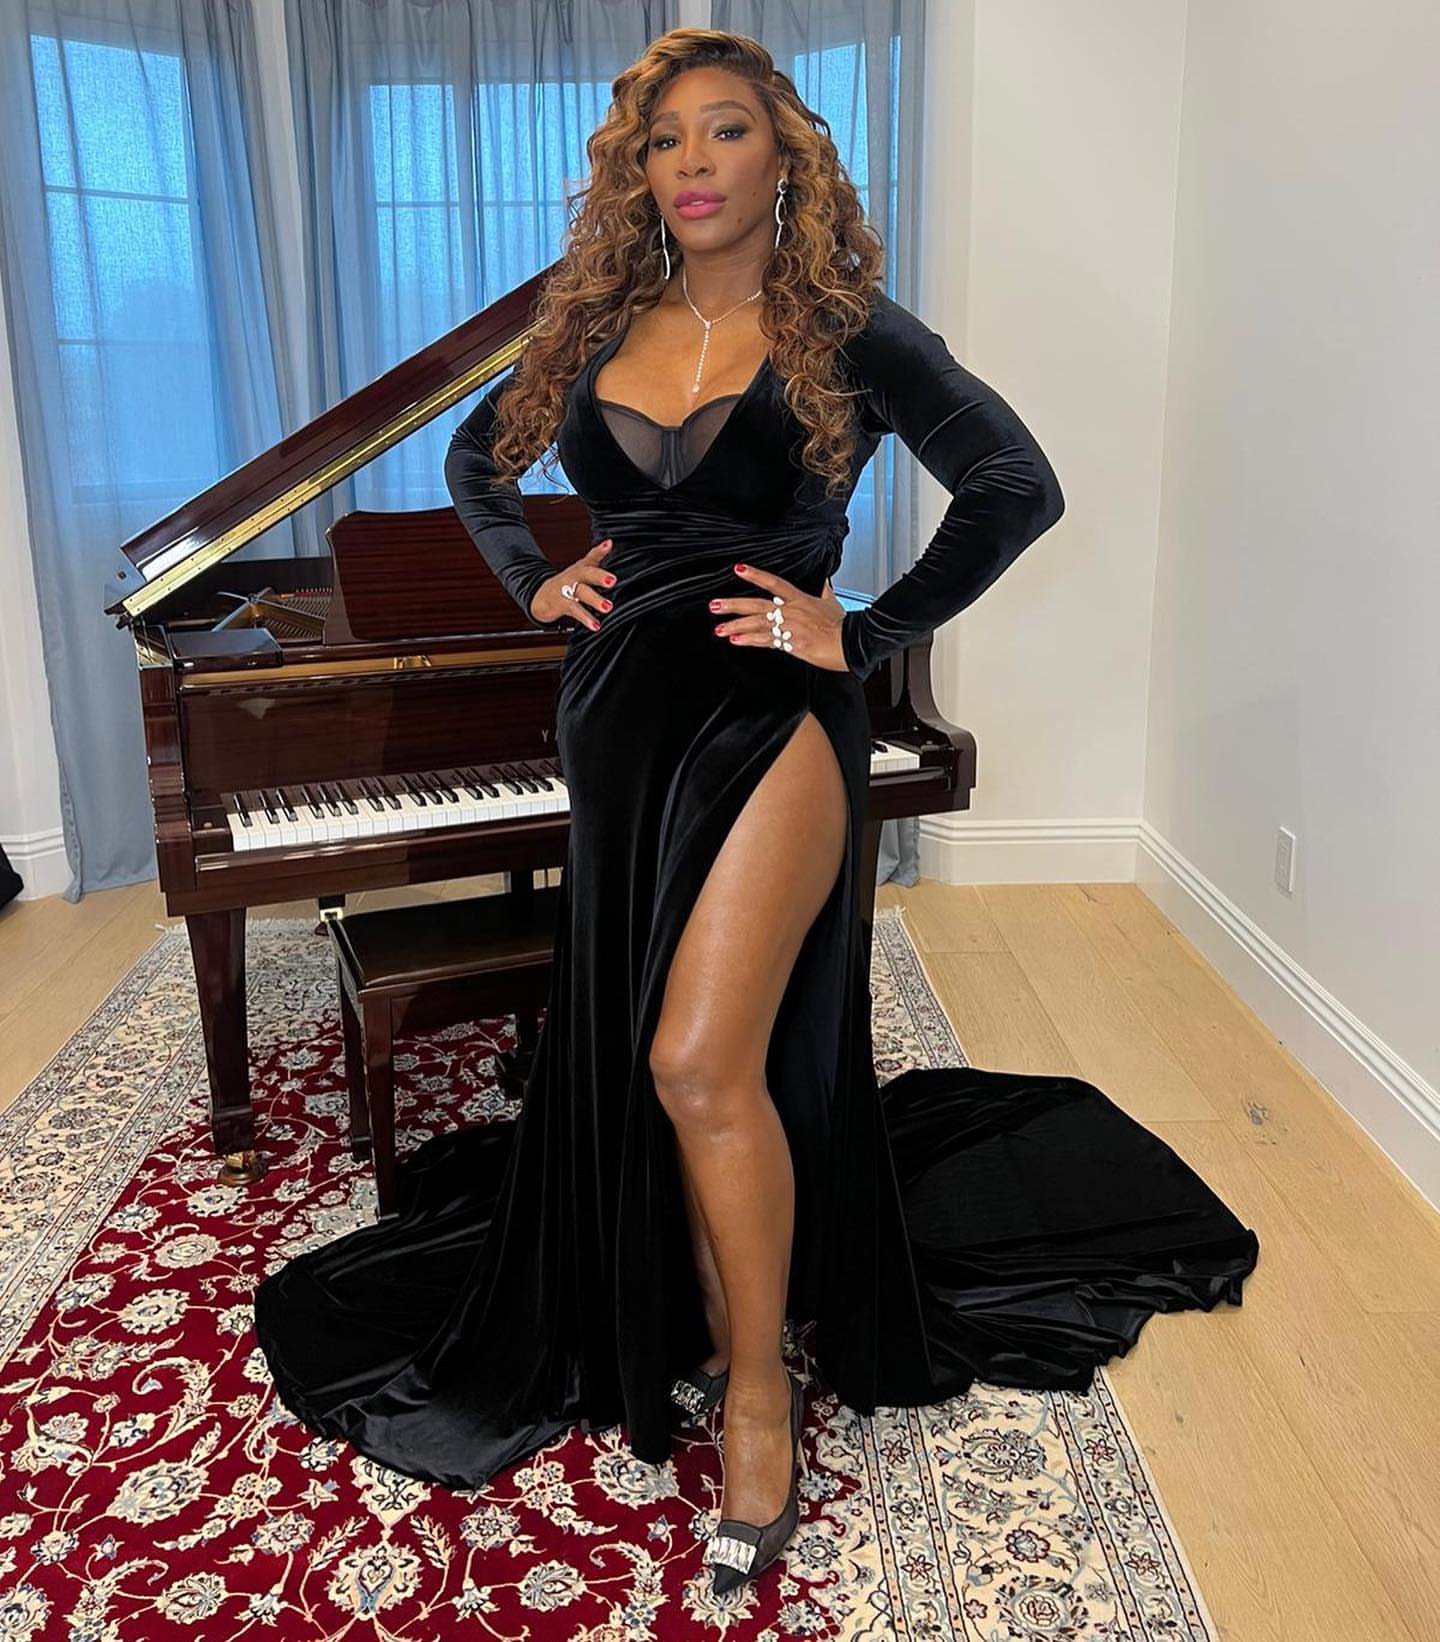 Serena Williams Shares Her Big Reveal! - Photo 14